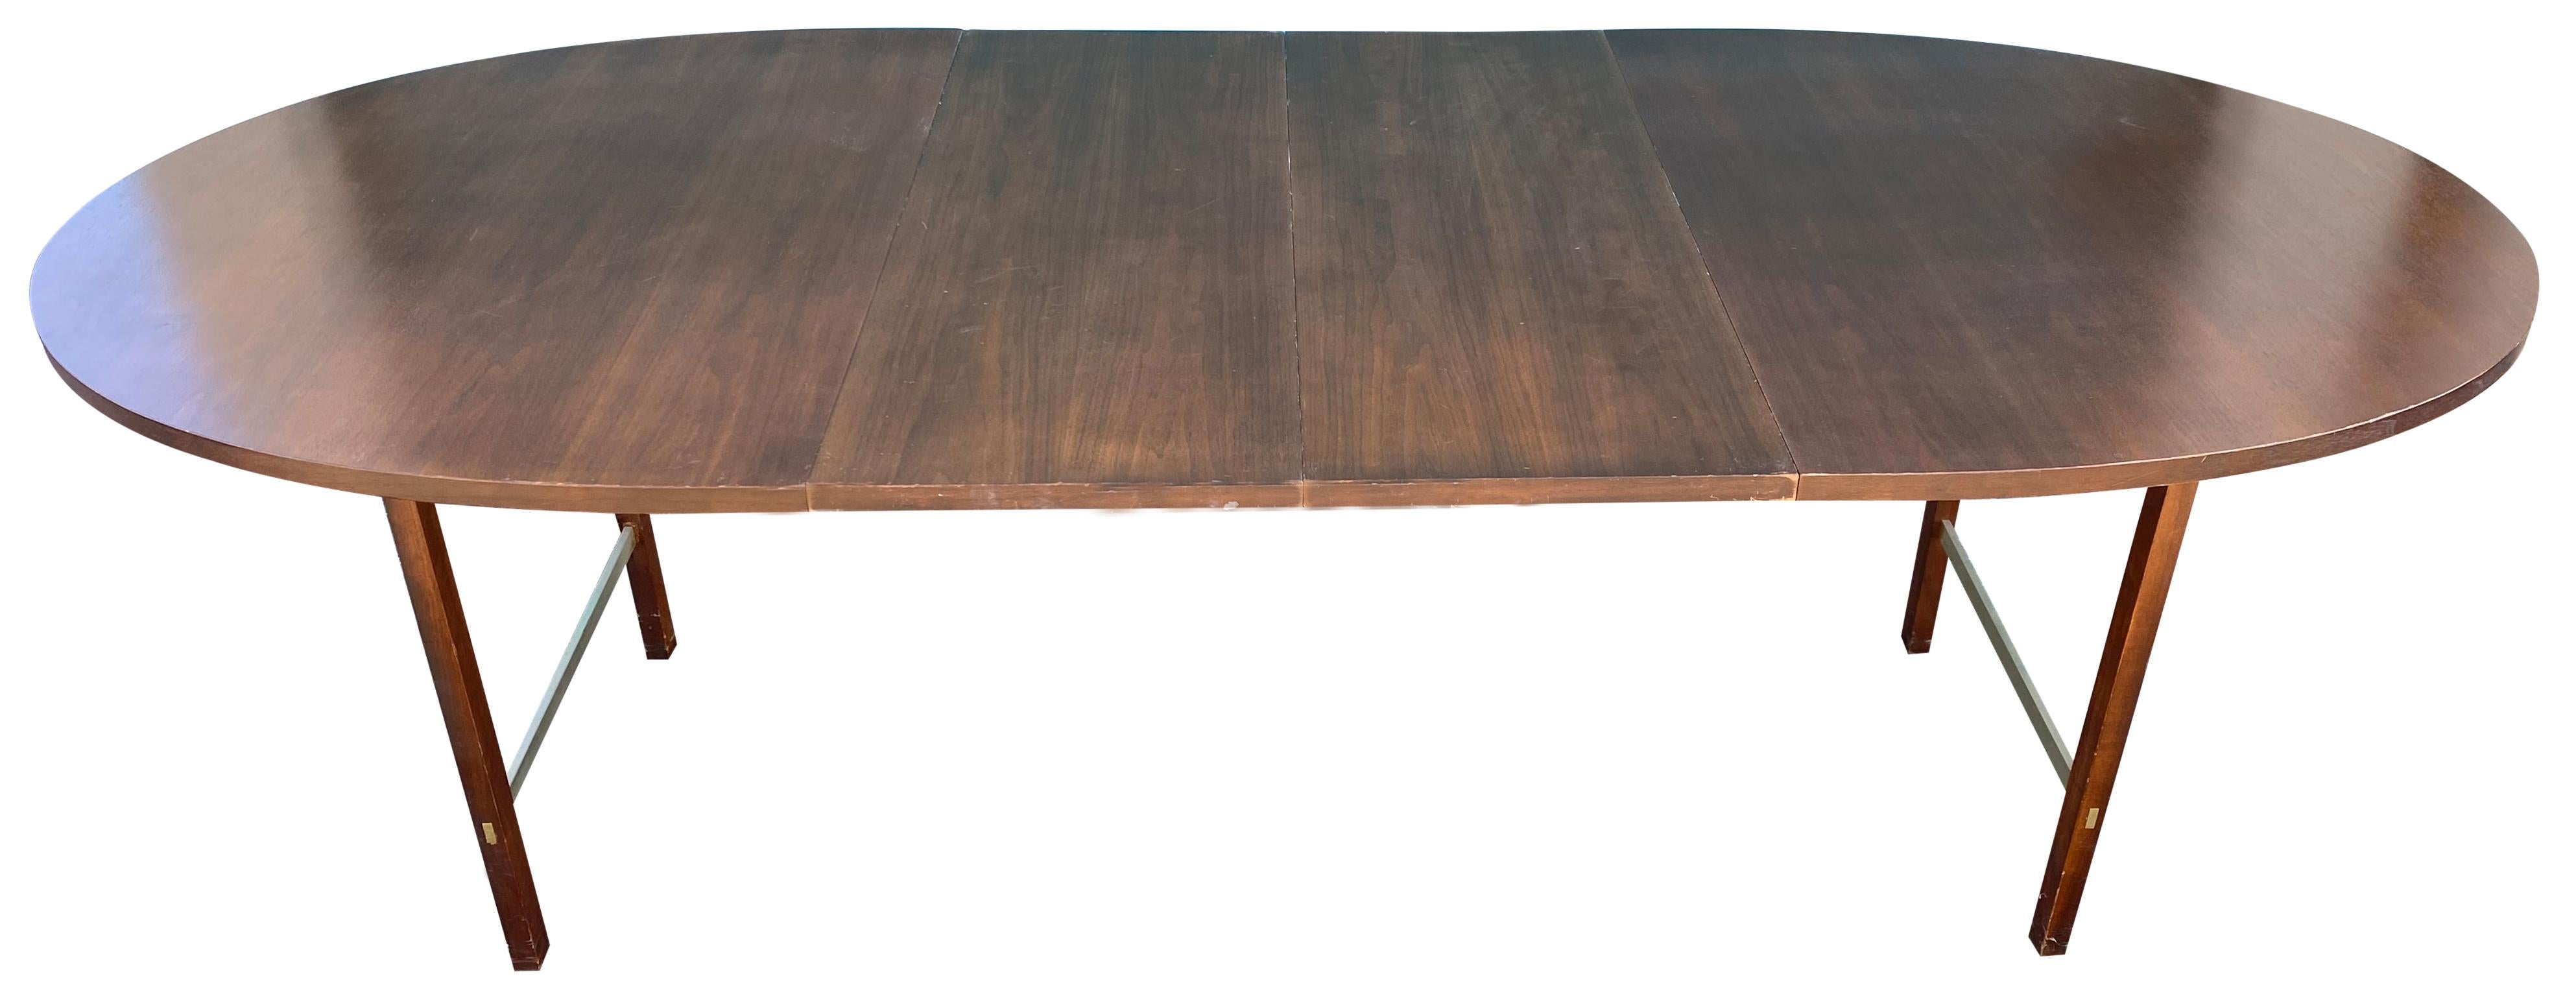 Mid-Century Modern Walnut Dining Table by Paul McCobb for Calvin 2 Leaves For Sale 1